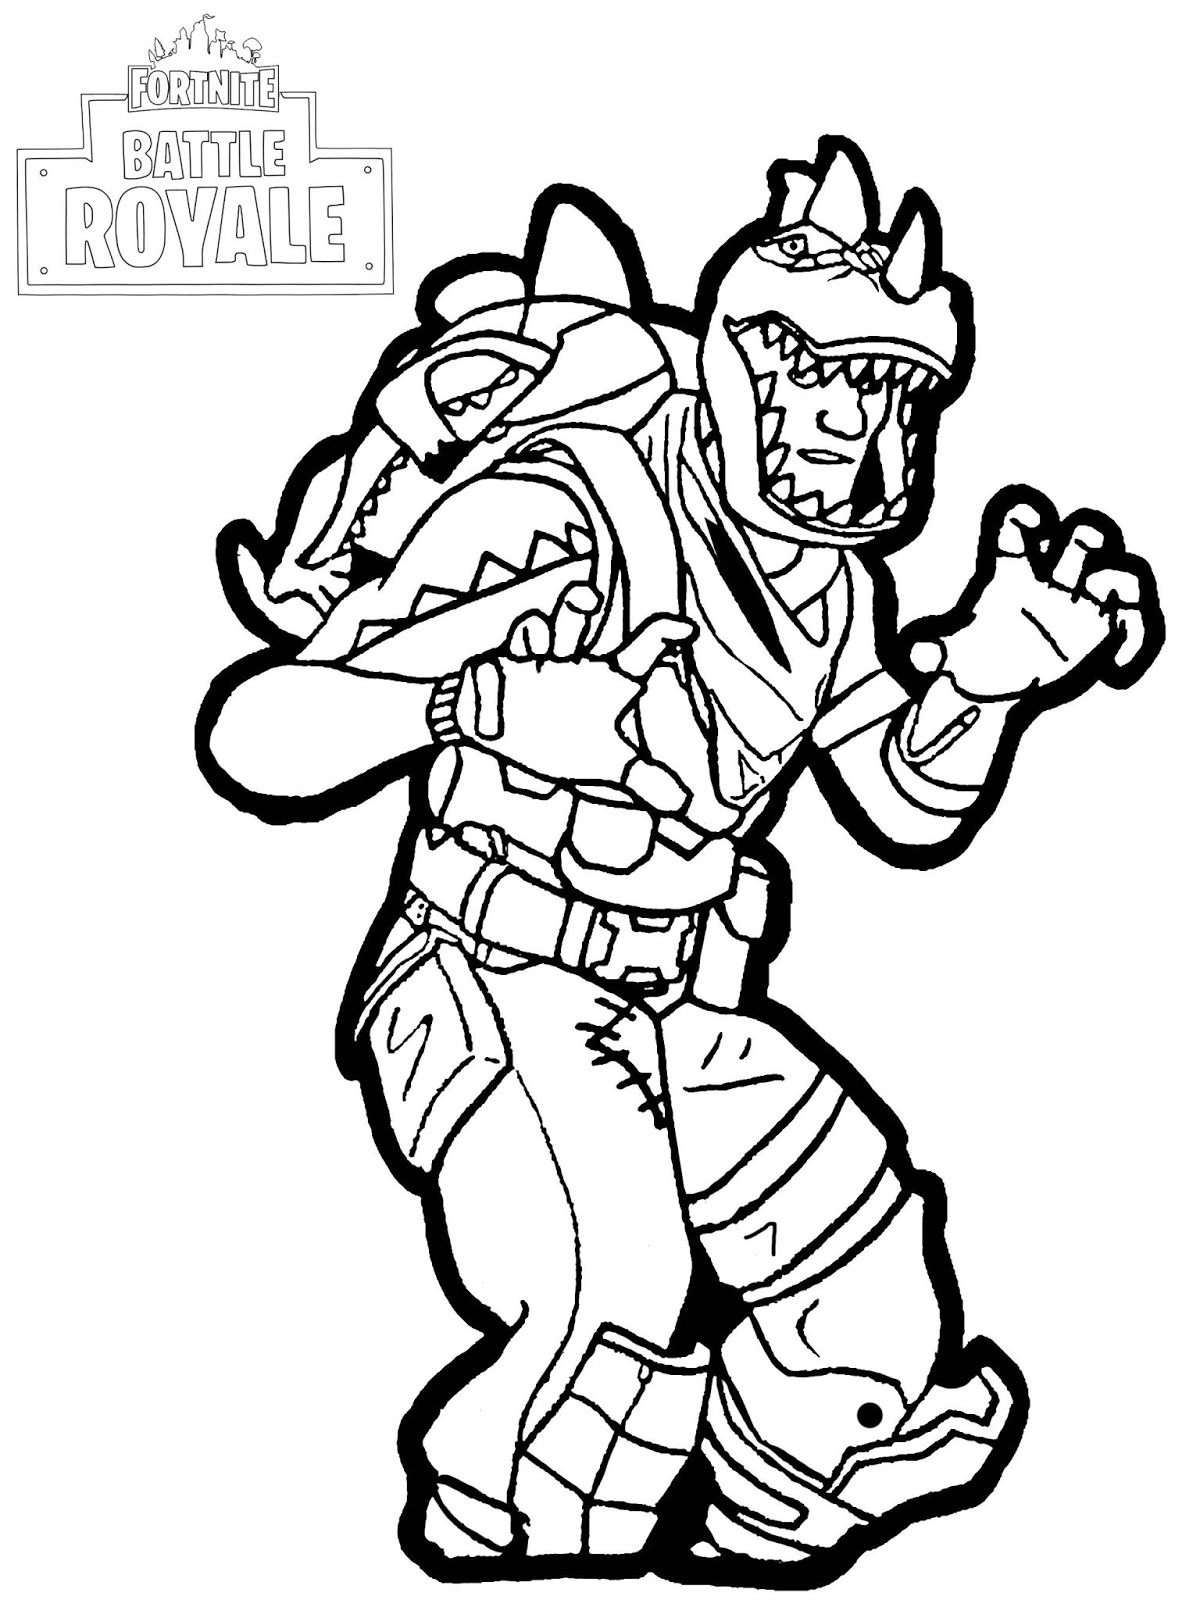 Fortnite Printables Coloring Pages - Printable Blank World